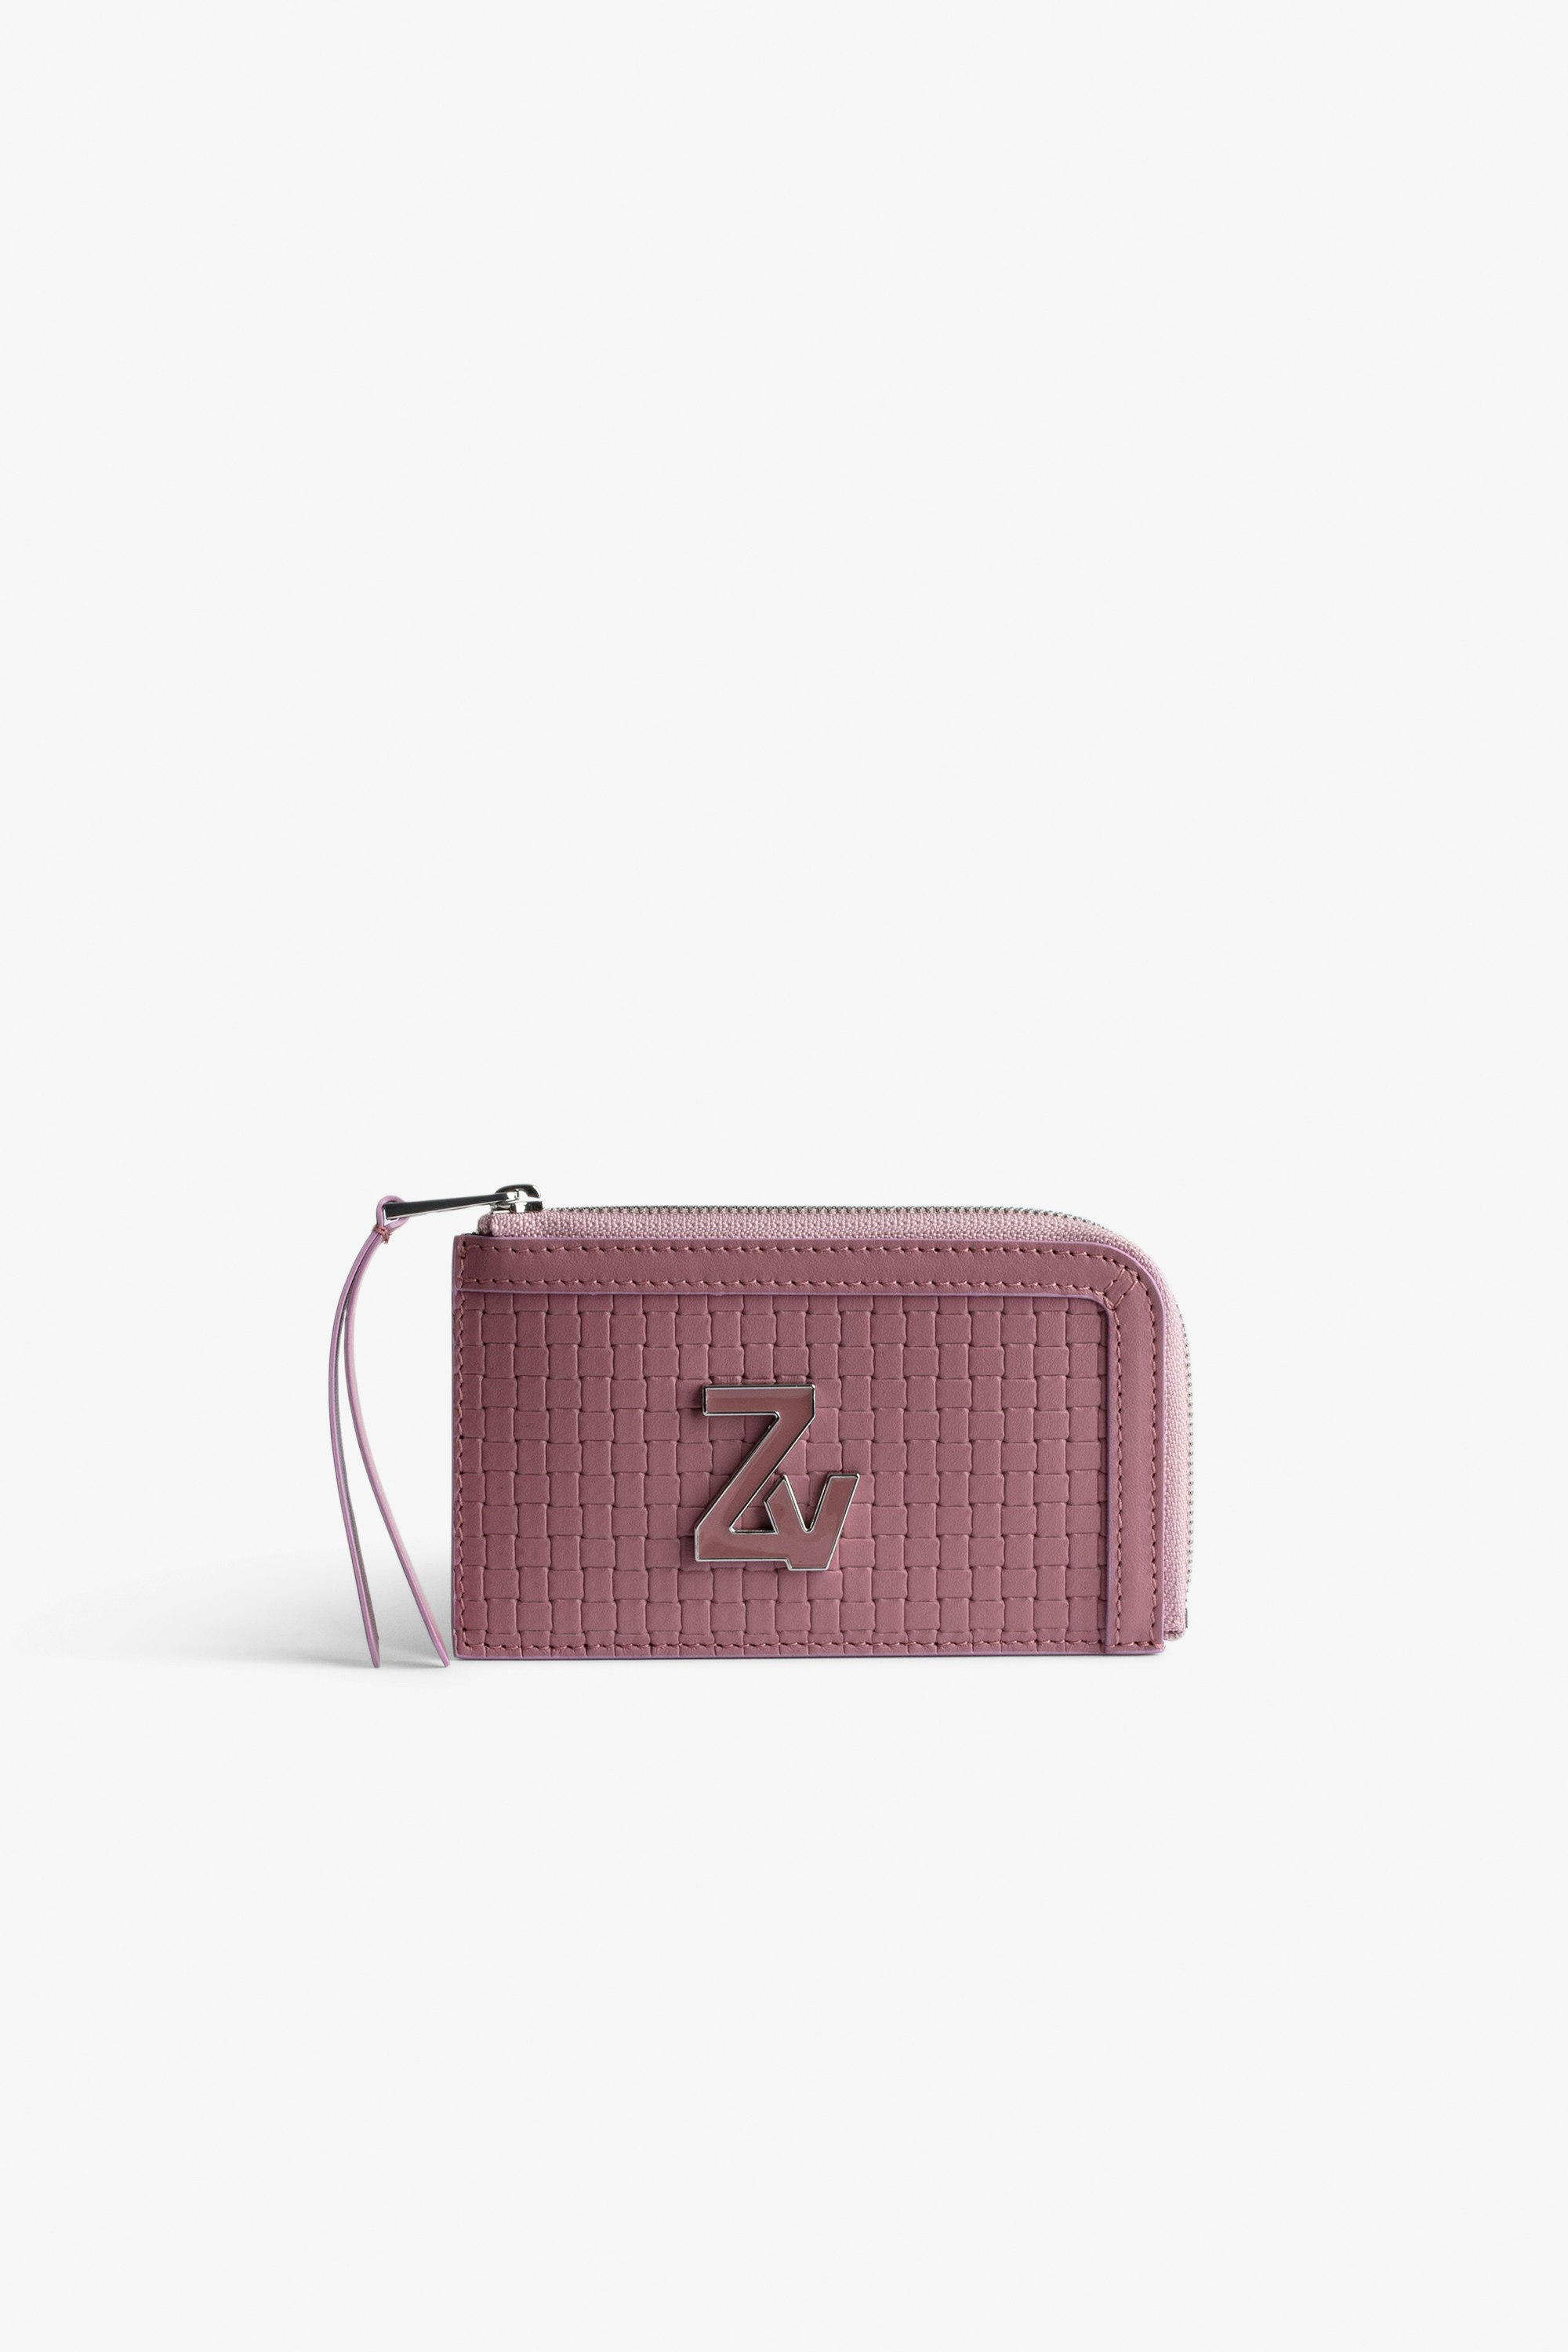 ZV Initiale Le Medium Card Case Women's card case in pink latticework leather with ZV clasp